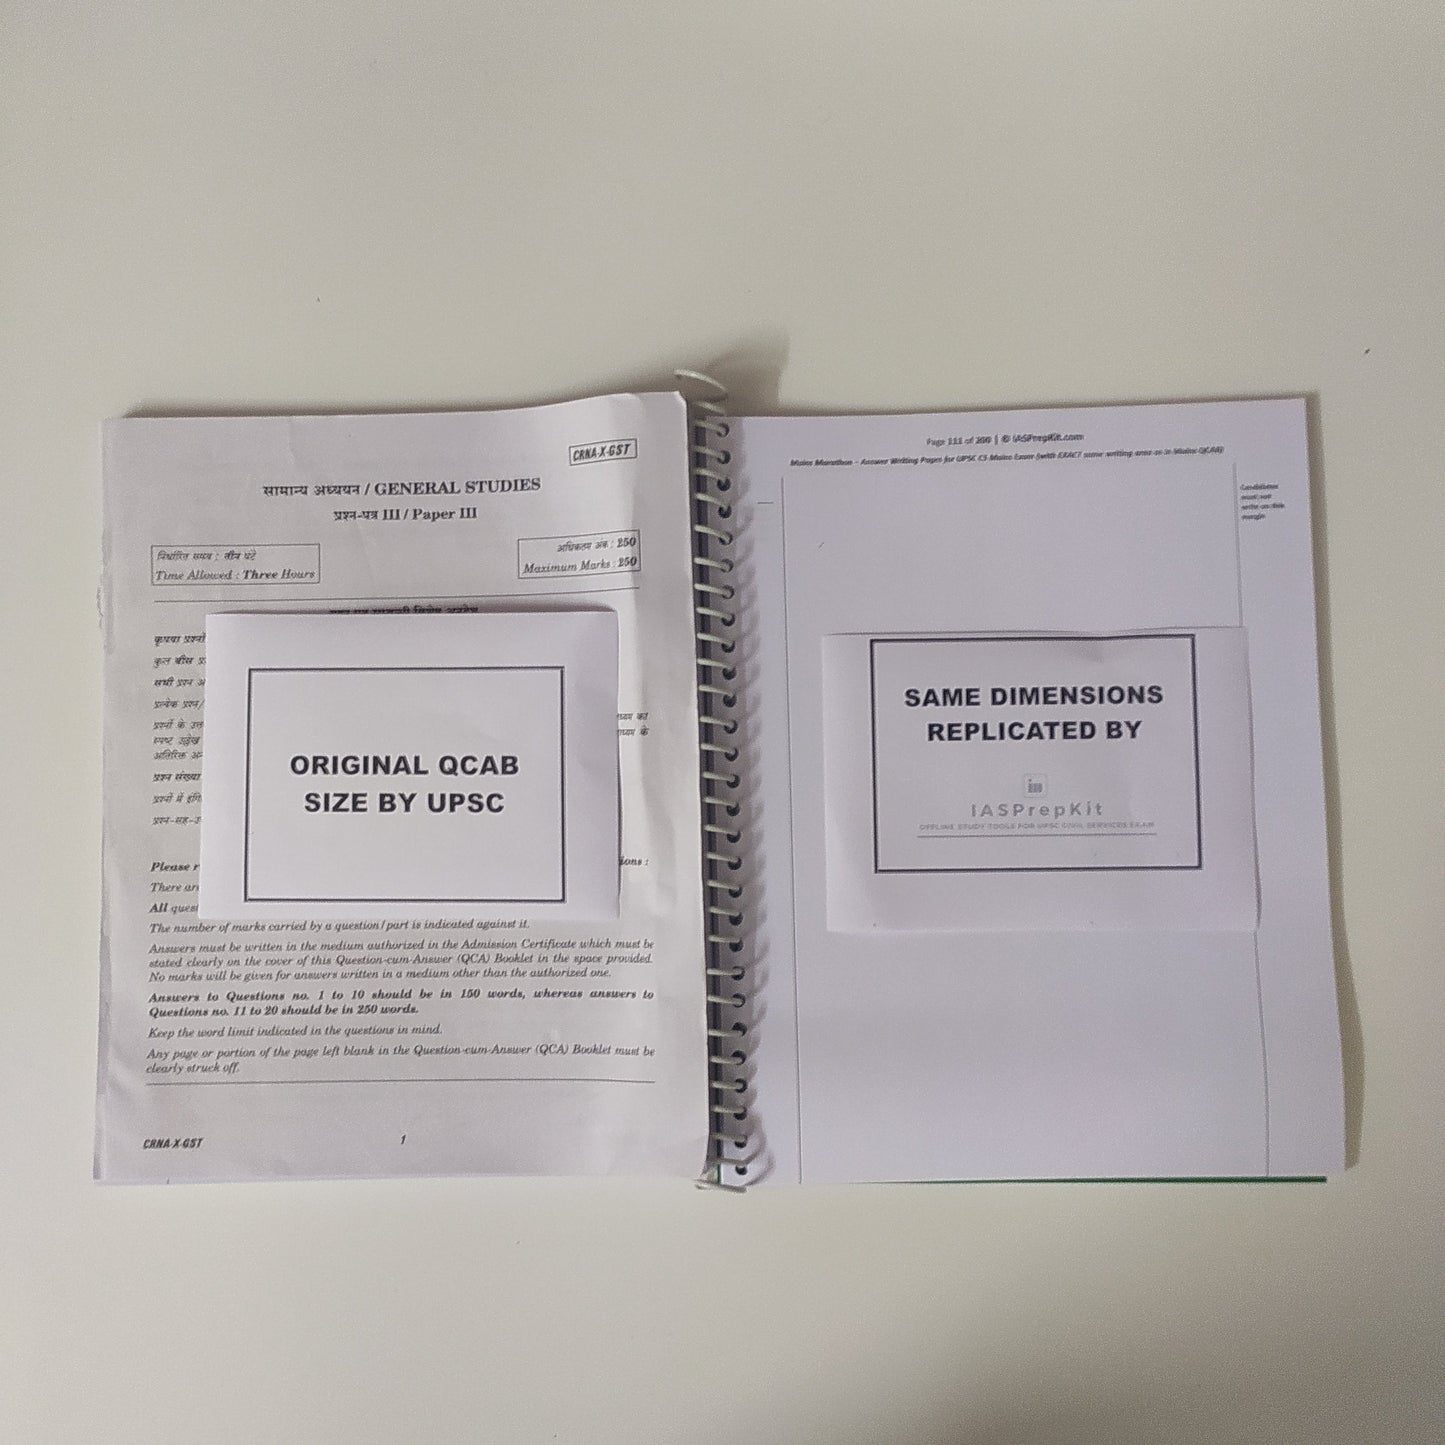 2 Booklets - Mains Marathon - Answer Writing Booklets for UPSC CS Mains Exam with exact same dimensions as in UPSC QCAB (200 pages in each booklet)